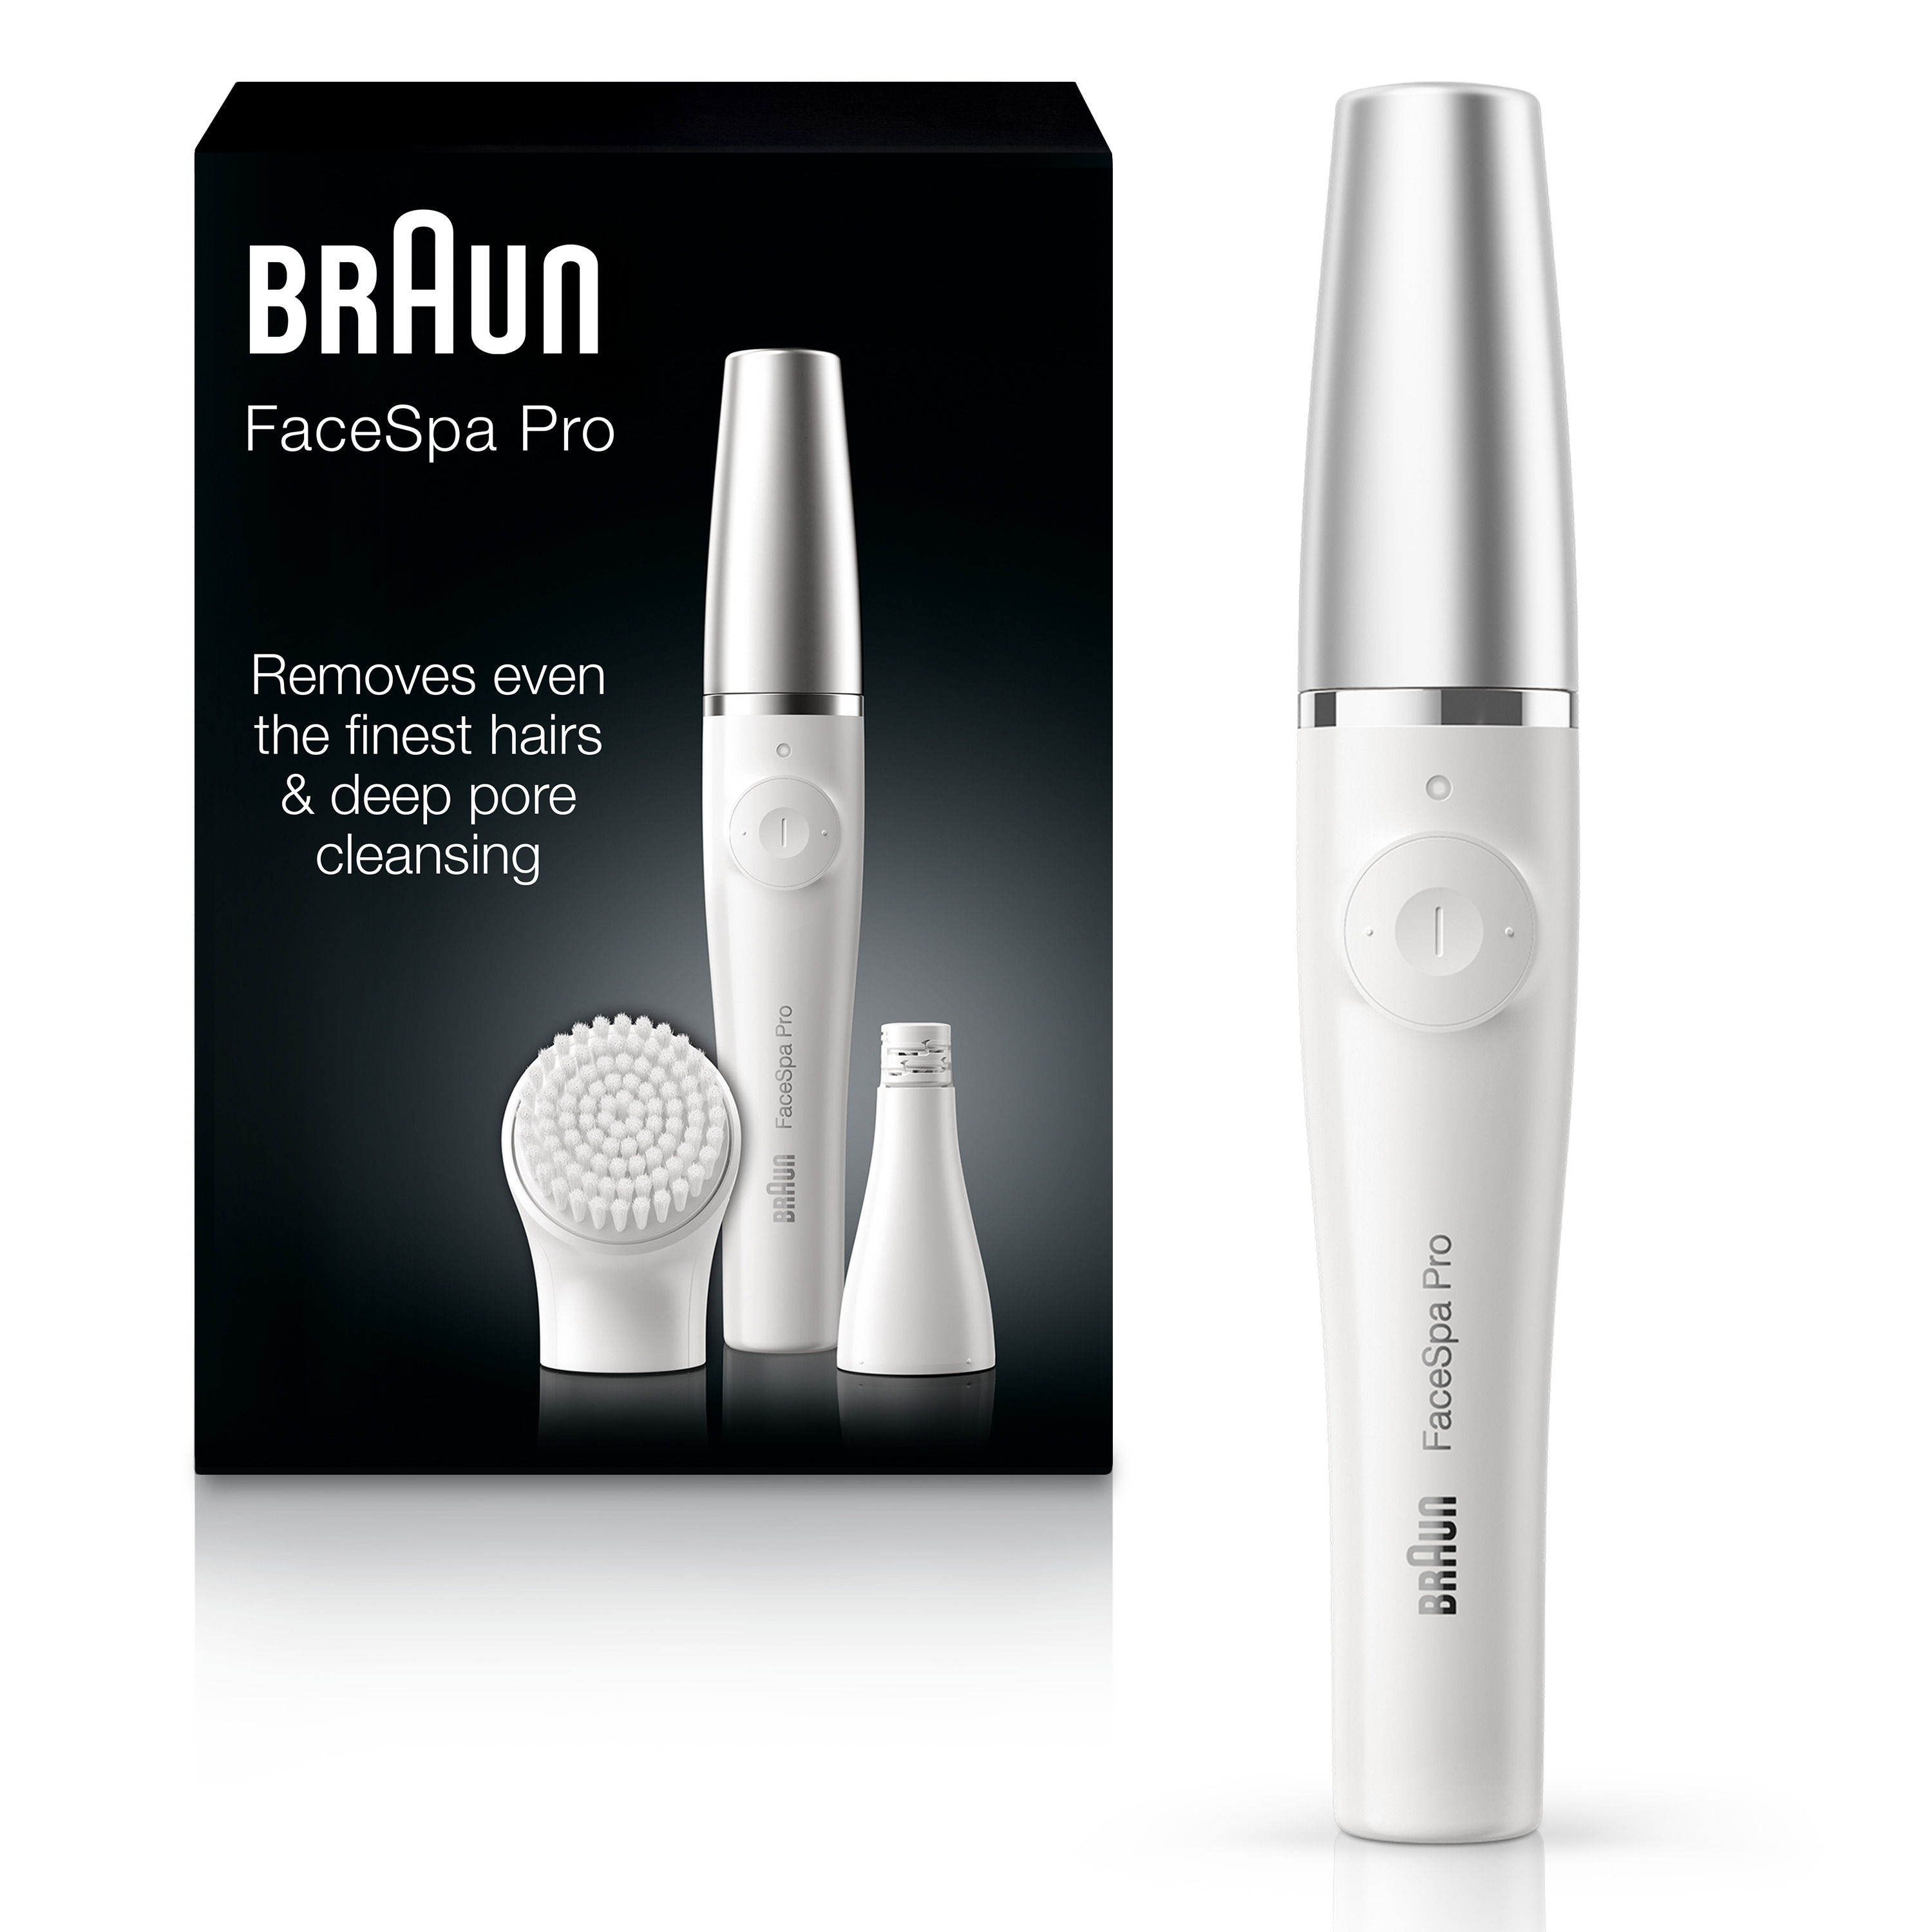 Braun FaceSpa Pro 910 Facial Epilator for Women with 1 Extra, White/Silver - image 2 of 13